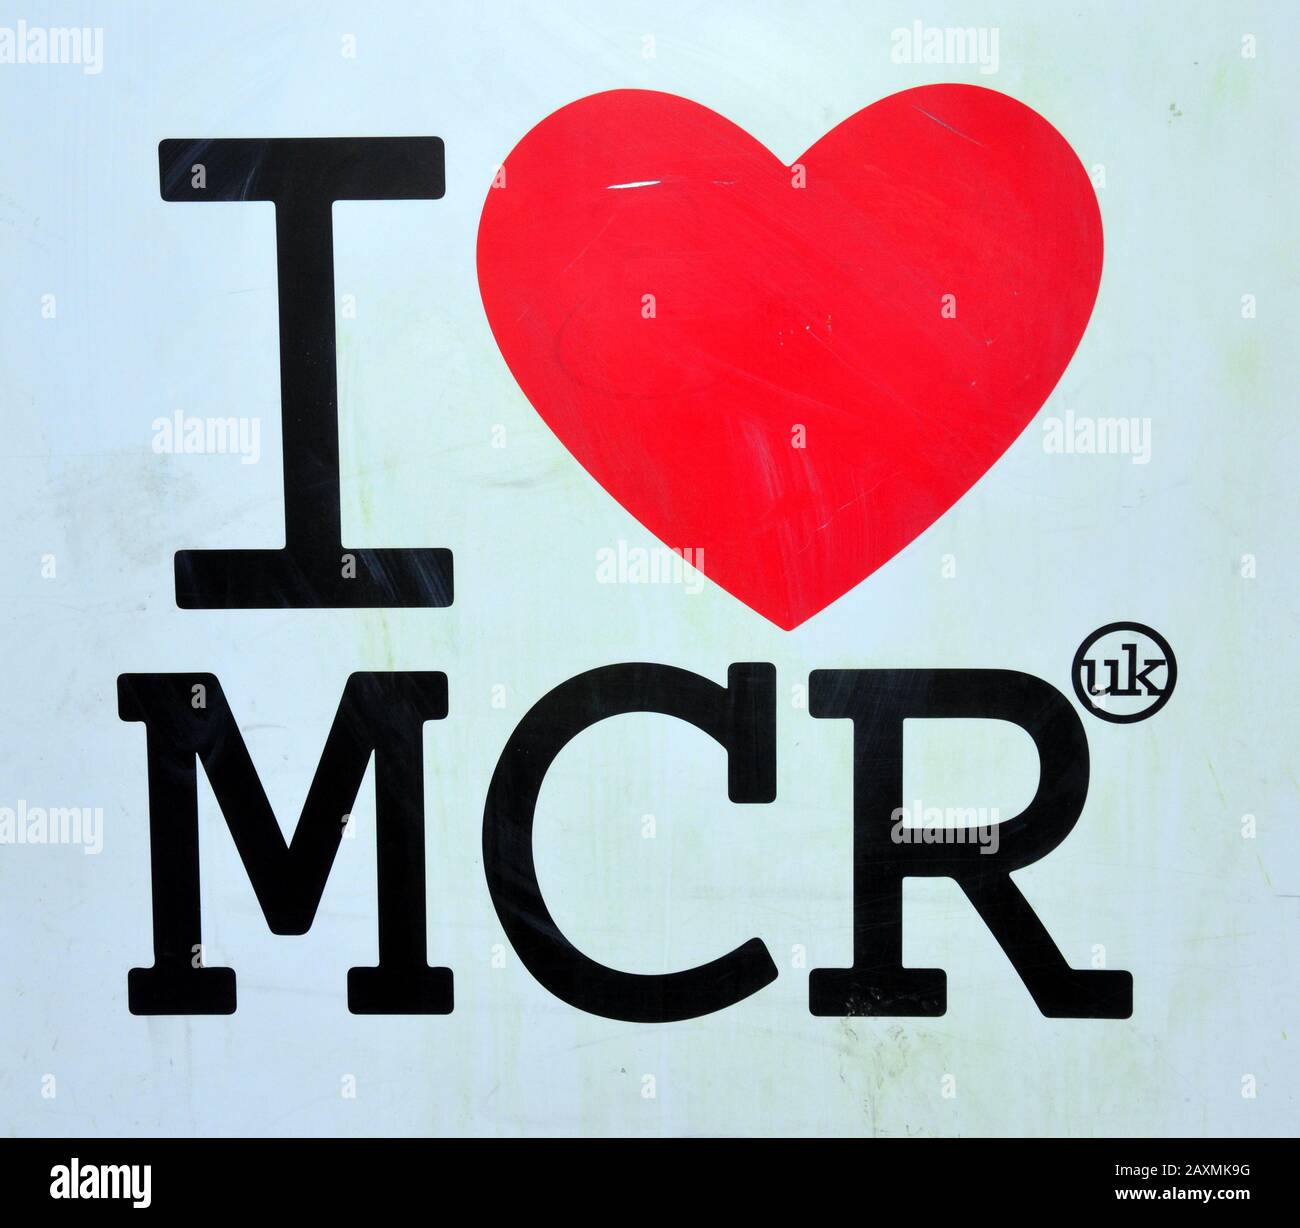 An 'I love Mcr' sign, using the image of a heart to indicate love and the 'Mcr' abbreviation for 'Manchester' in Manchester, uk Stock Photo